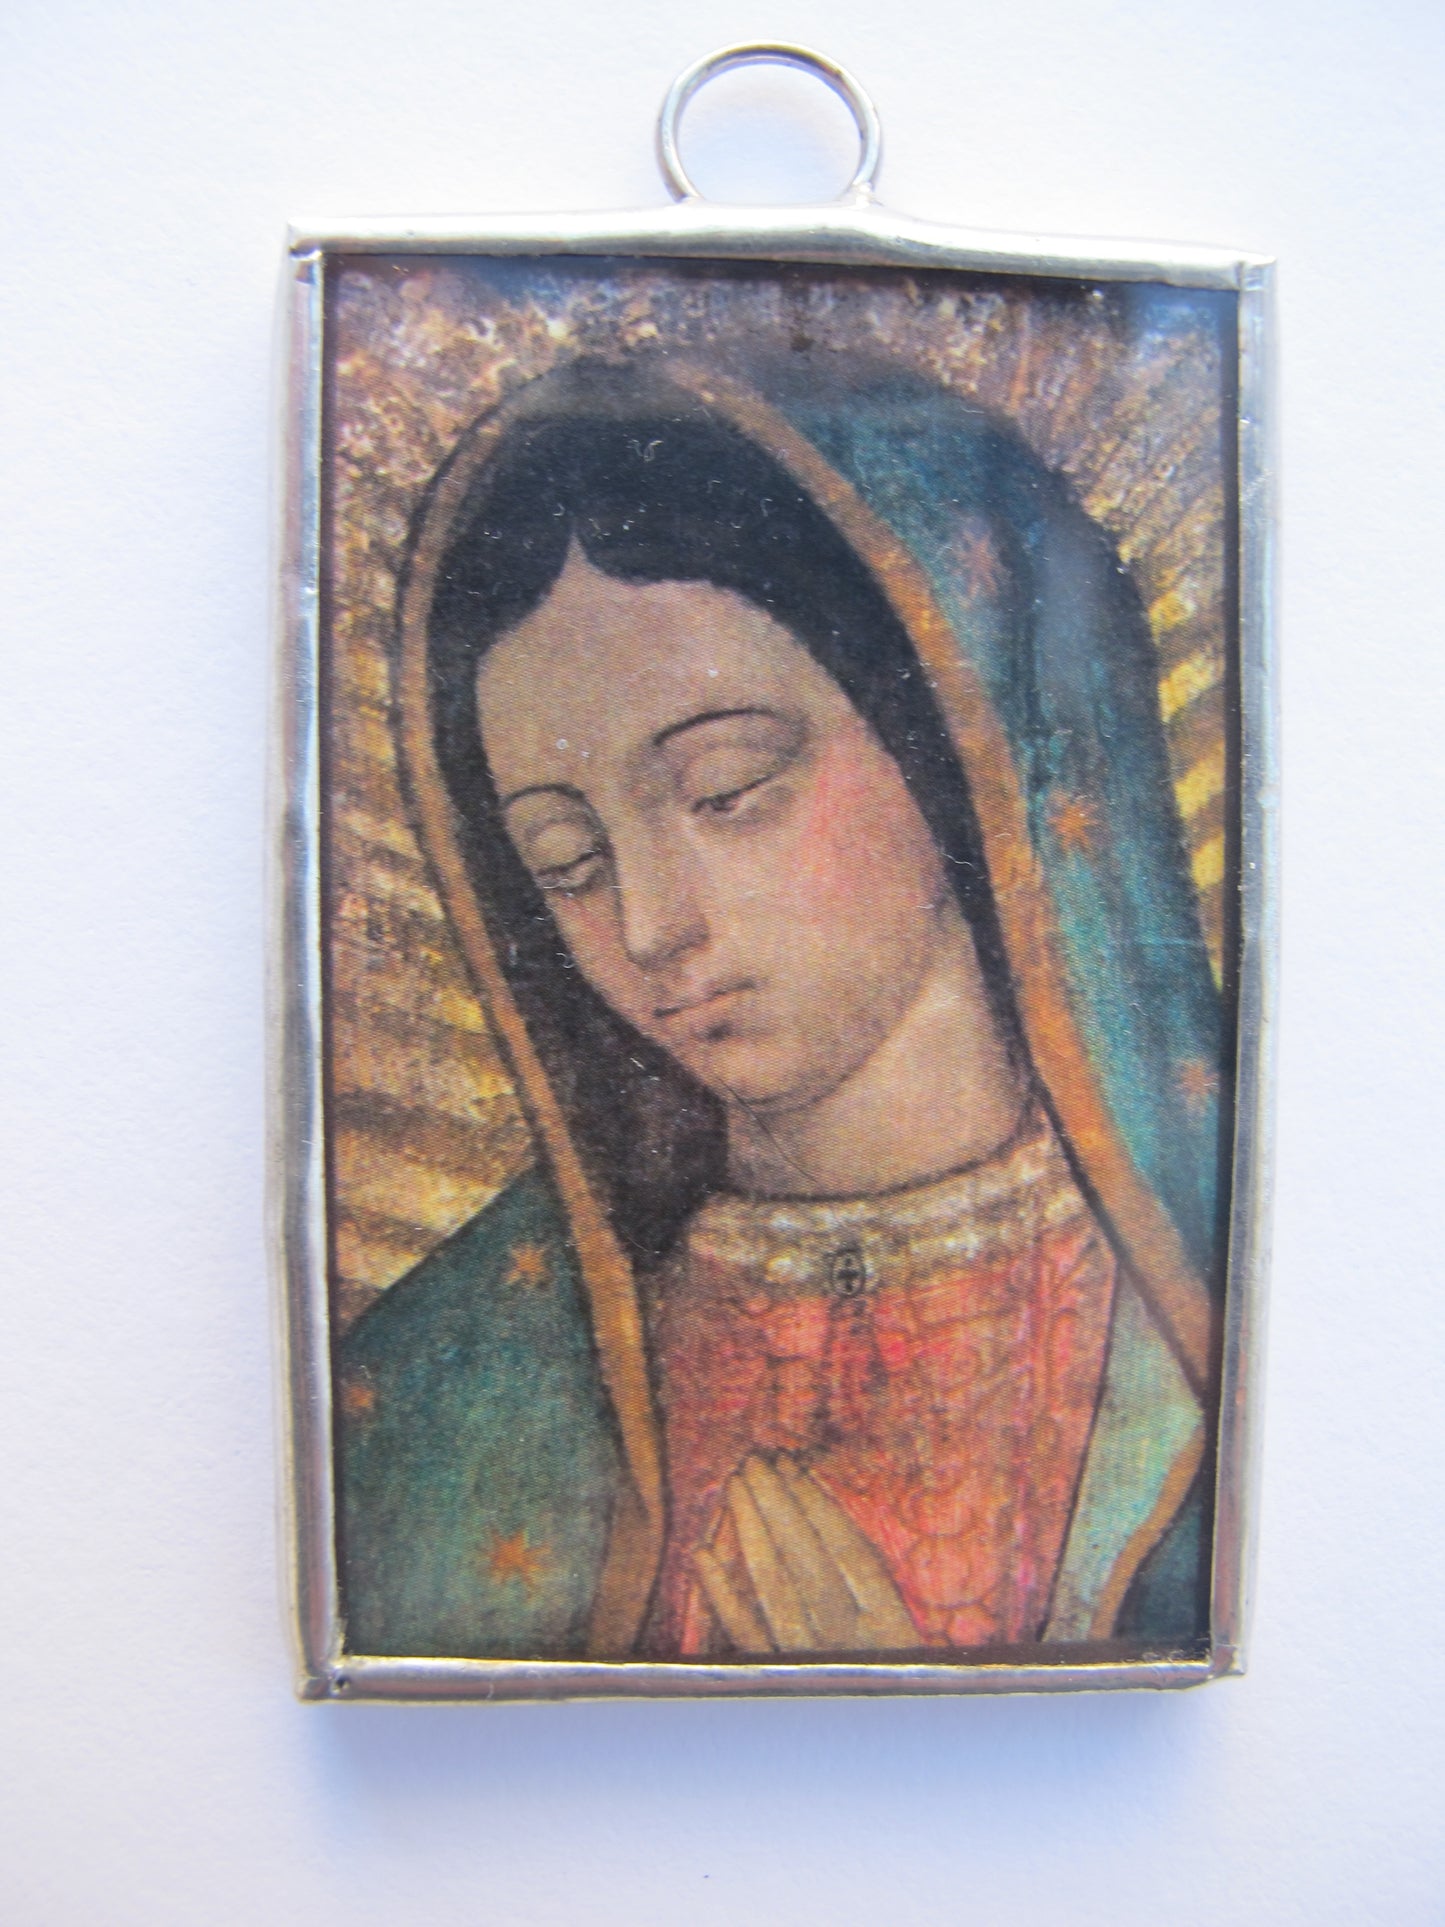 Juan Diego's Tilma Our Lady of Guadalupe Ornament